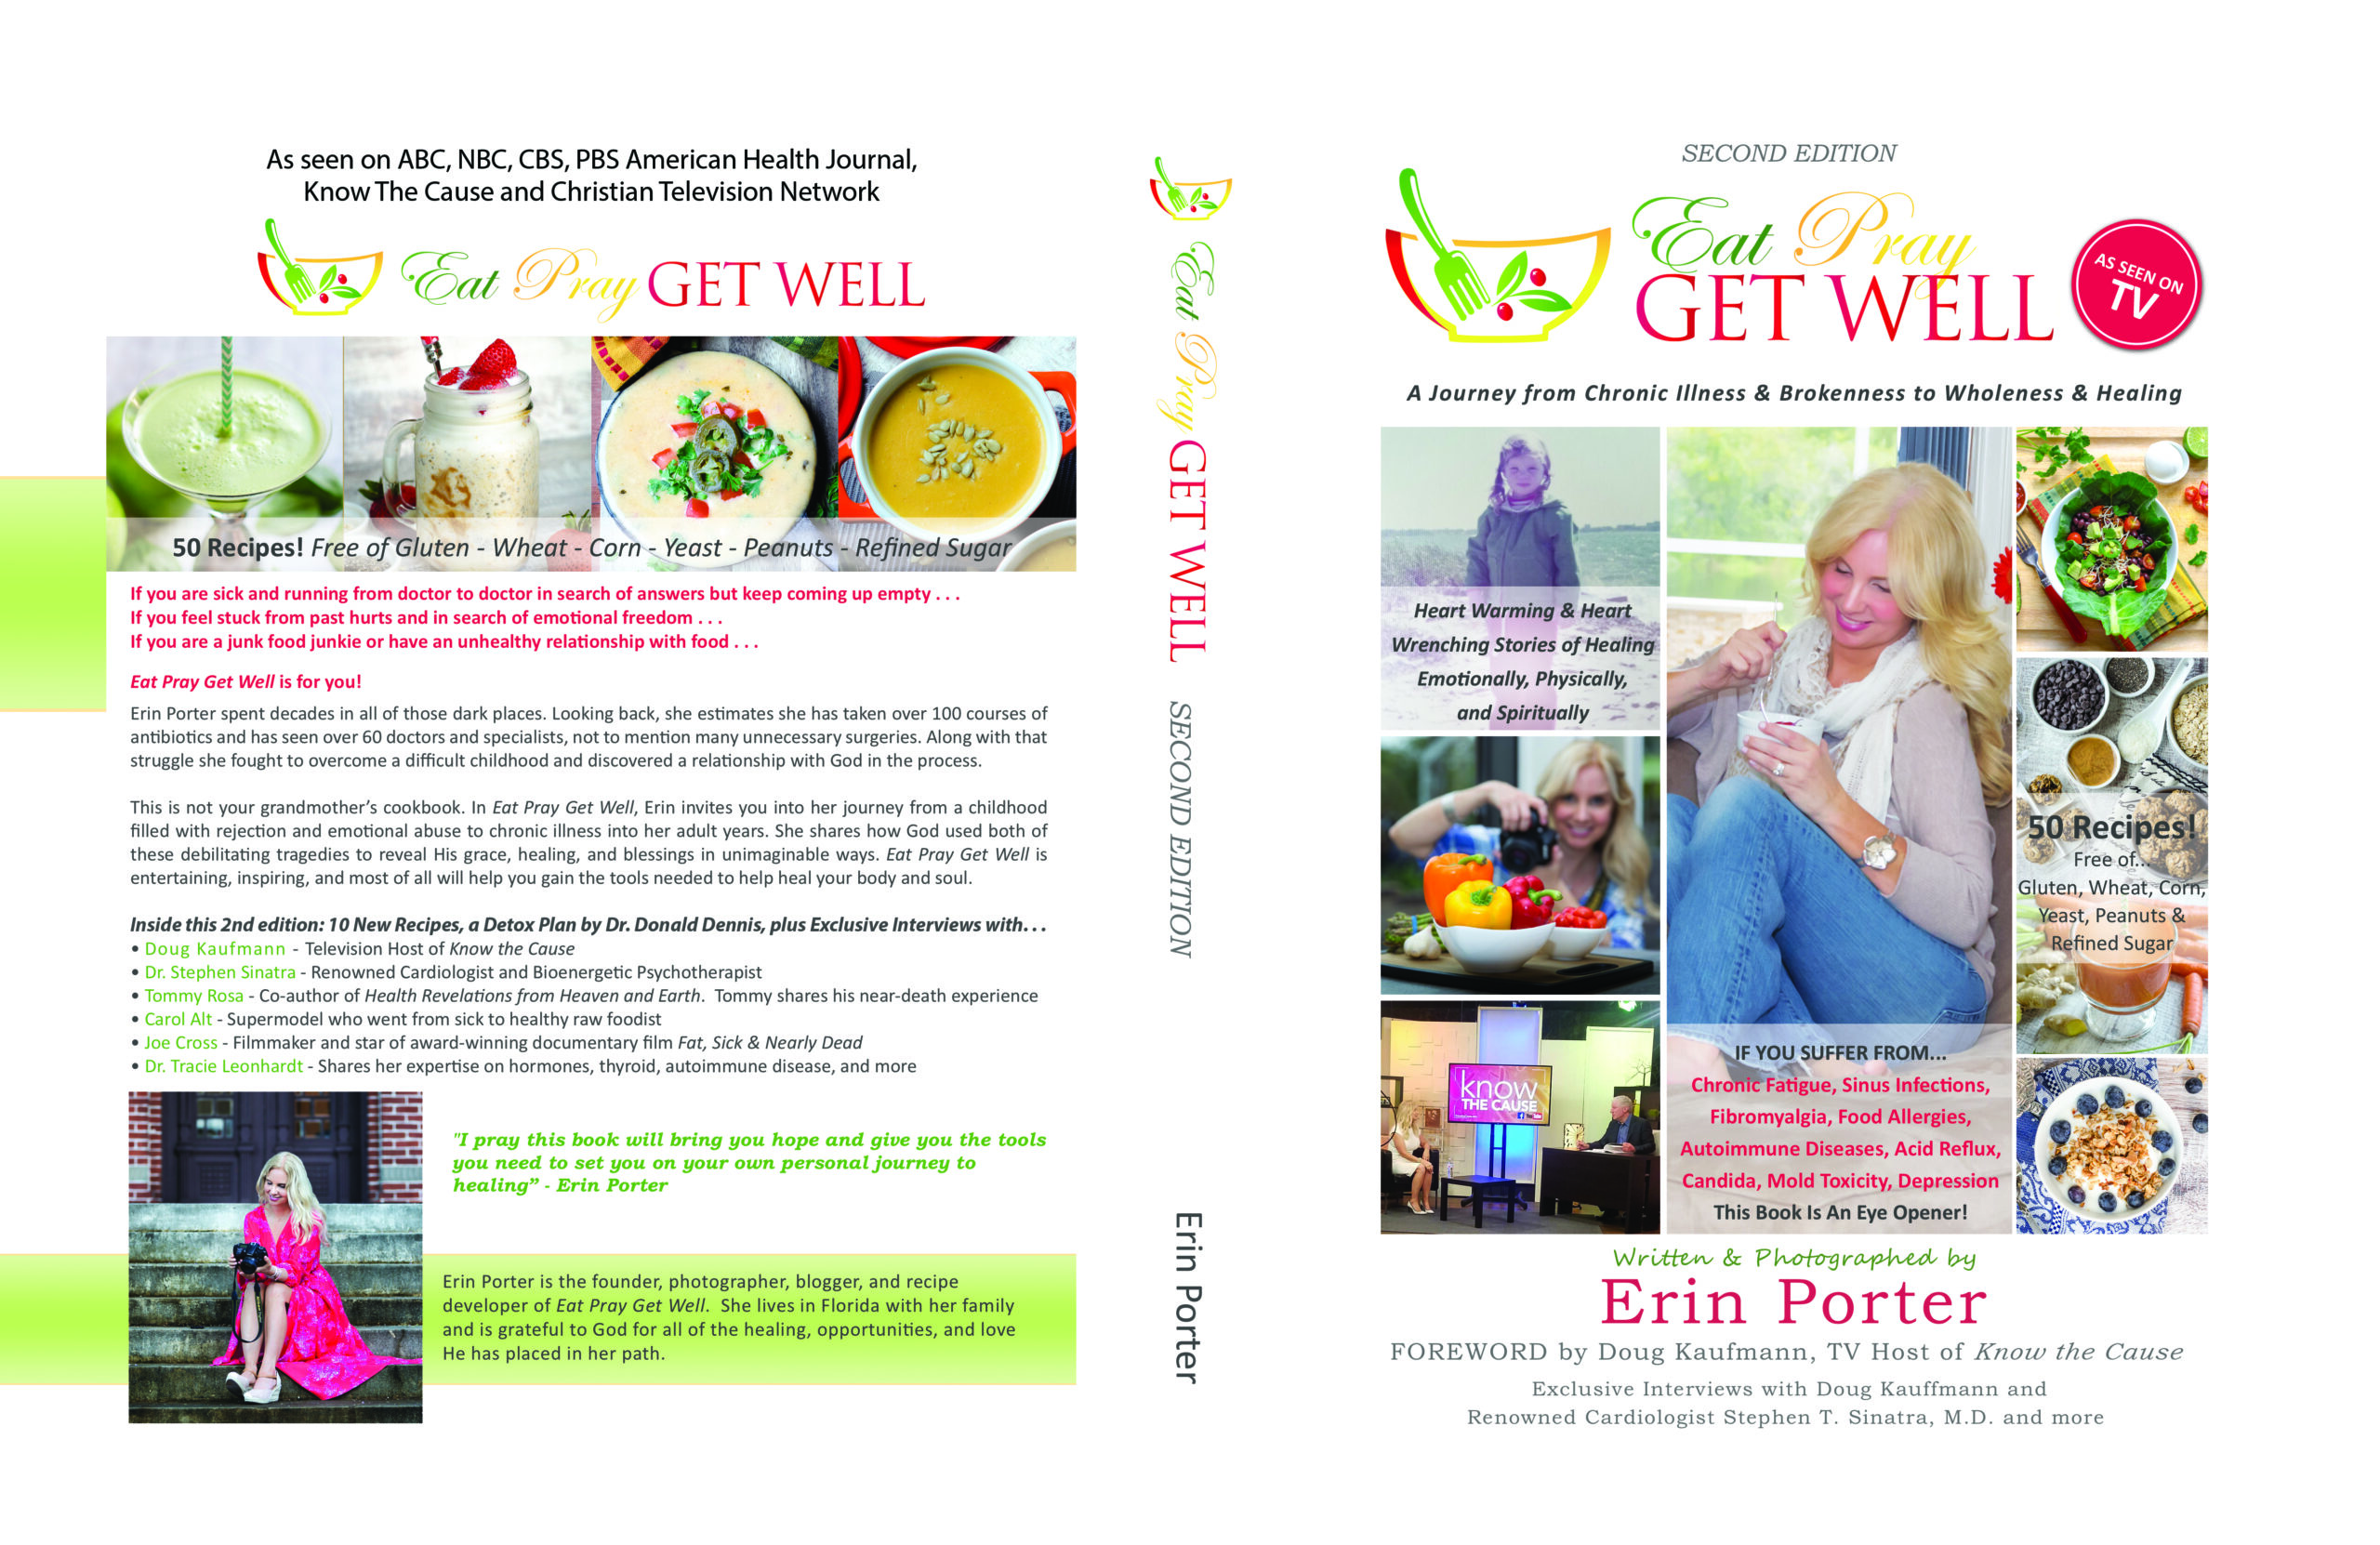 Eat Pray Get Well - Second Edition Book Cover